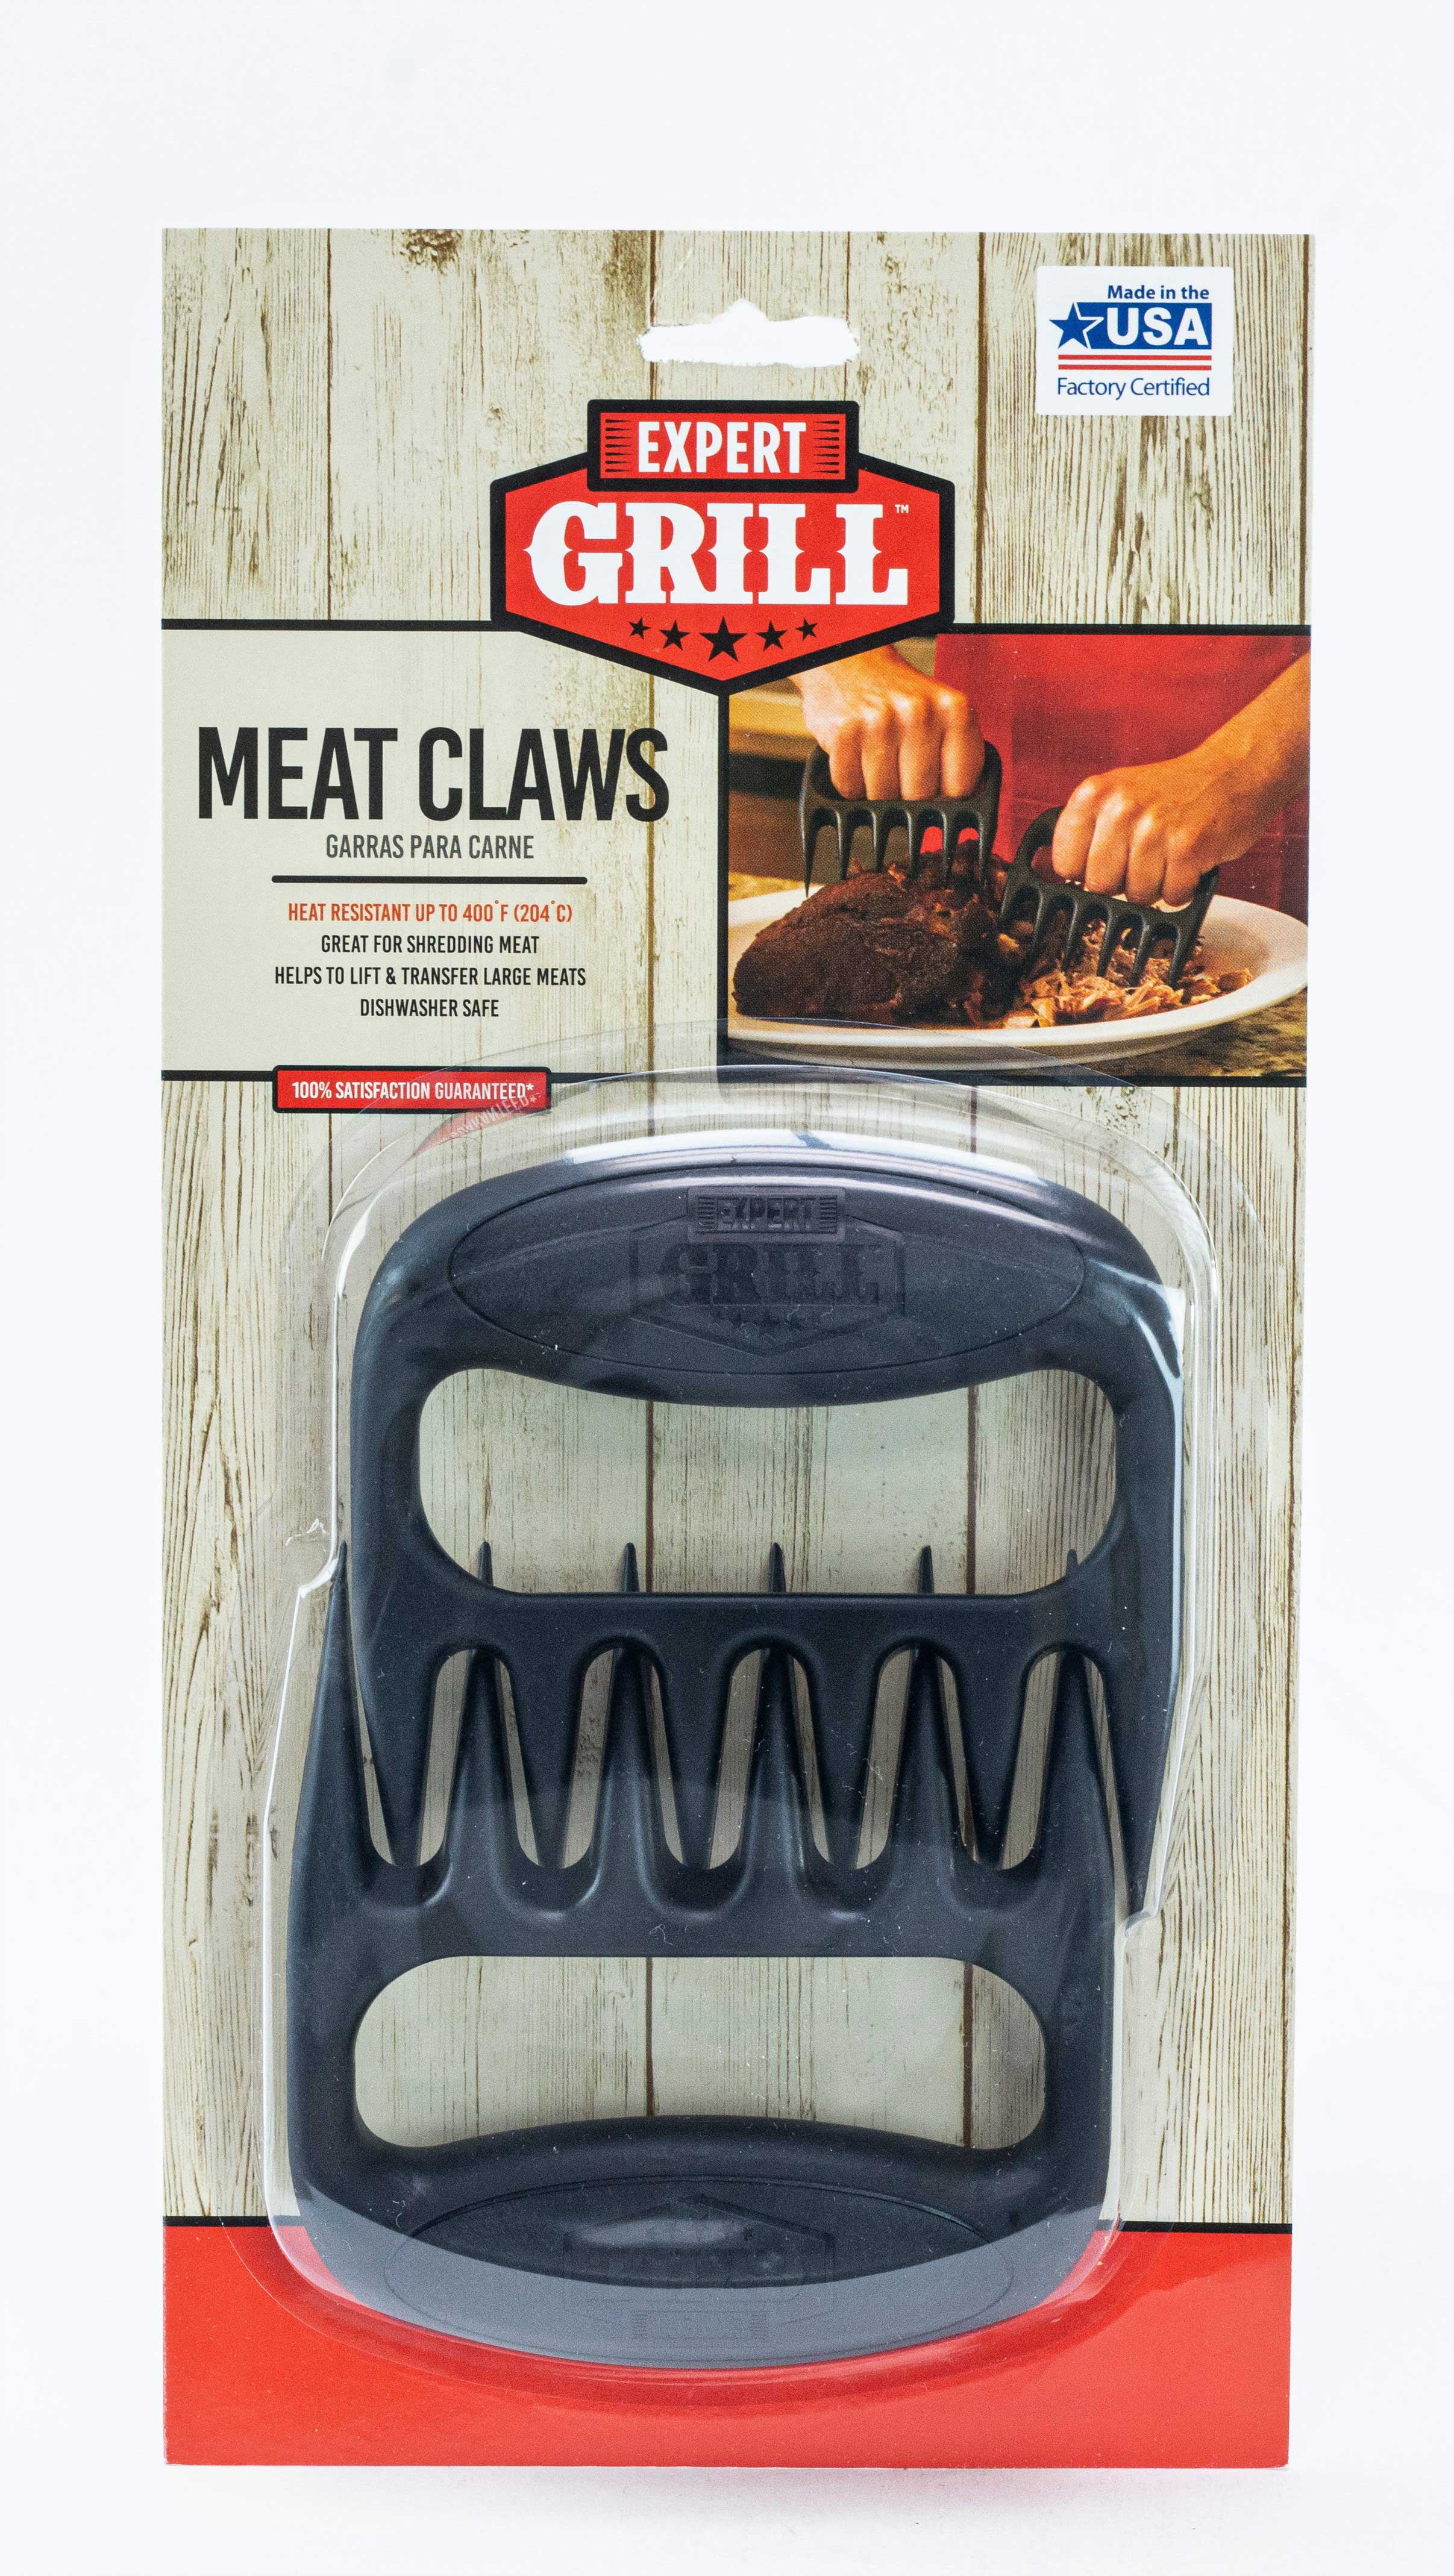 GrilLight GrillClaw Meat Shredder Bear Claws - Comfy Ergonomic Grip |  Strong Enough to Lift 50 Lbs | FDA Approved, BPA Free